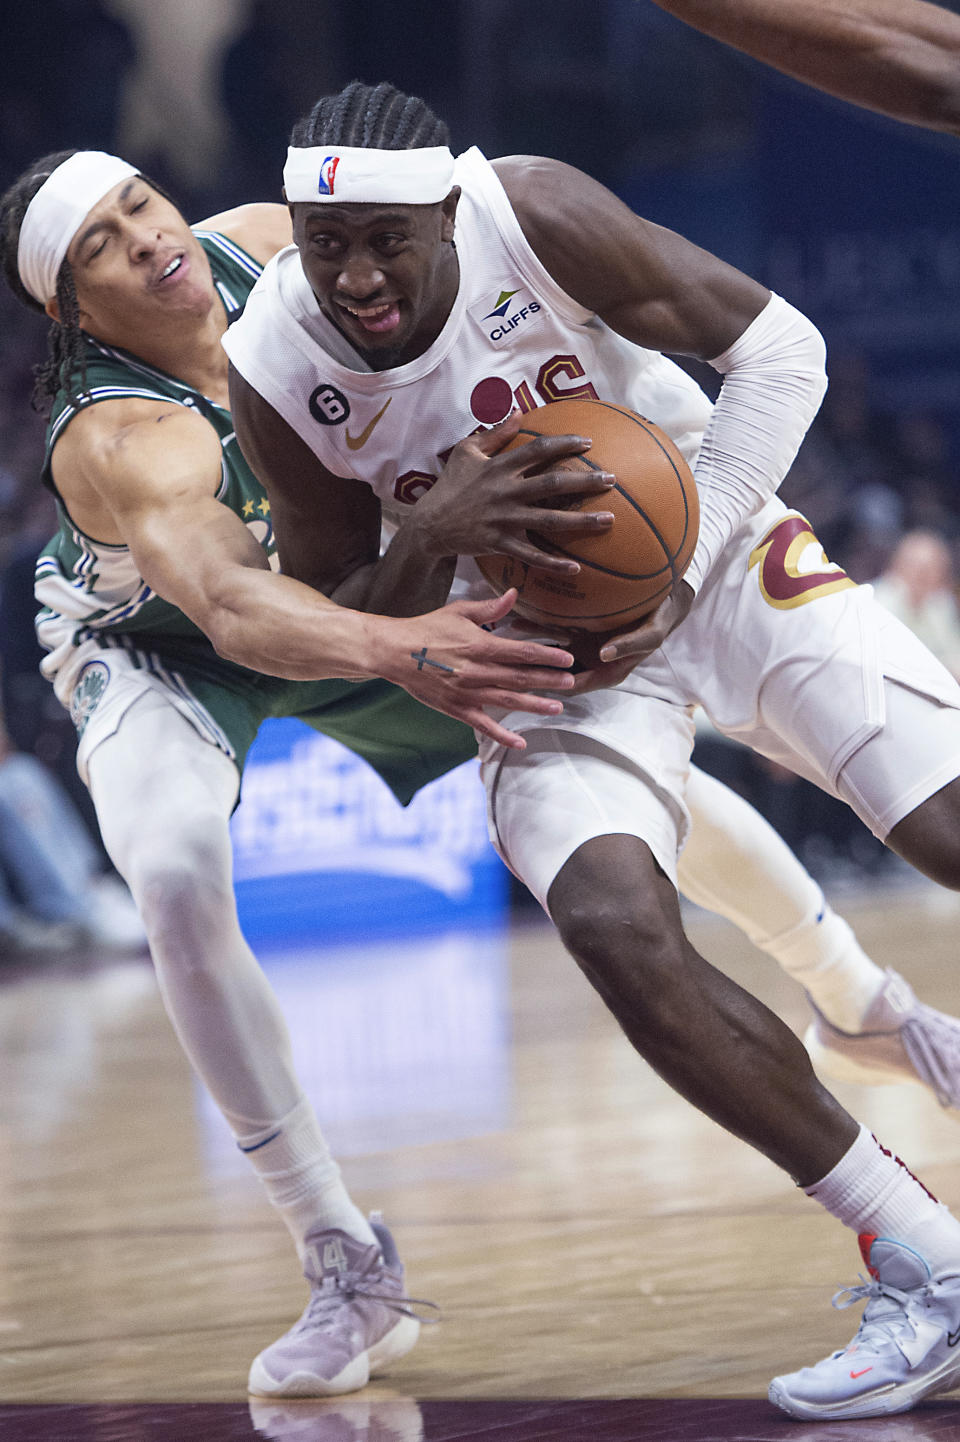 Cleveland Cavaliers' Caris LeVert, with ball, drives past Detroit Pistons' R.J. Hampton during the first half of an NBA basketball game in Cleveland, Saturday, March 4, 2023. (AP Photo/Phil Long)